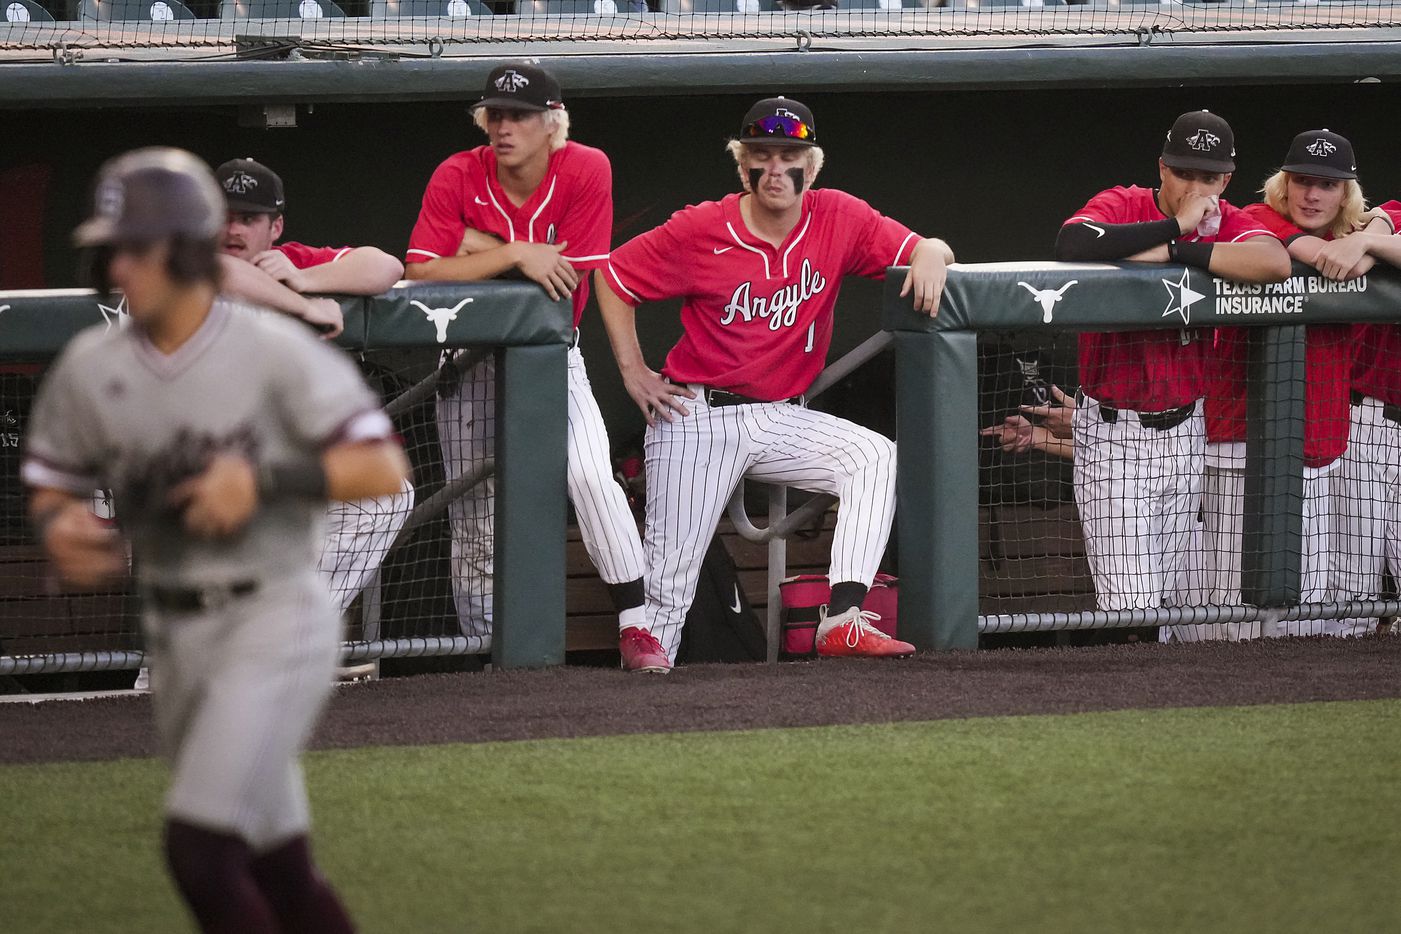 Argyle players look on from the dugout as Sinton shortstop Blake Mitchell heads for home to...